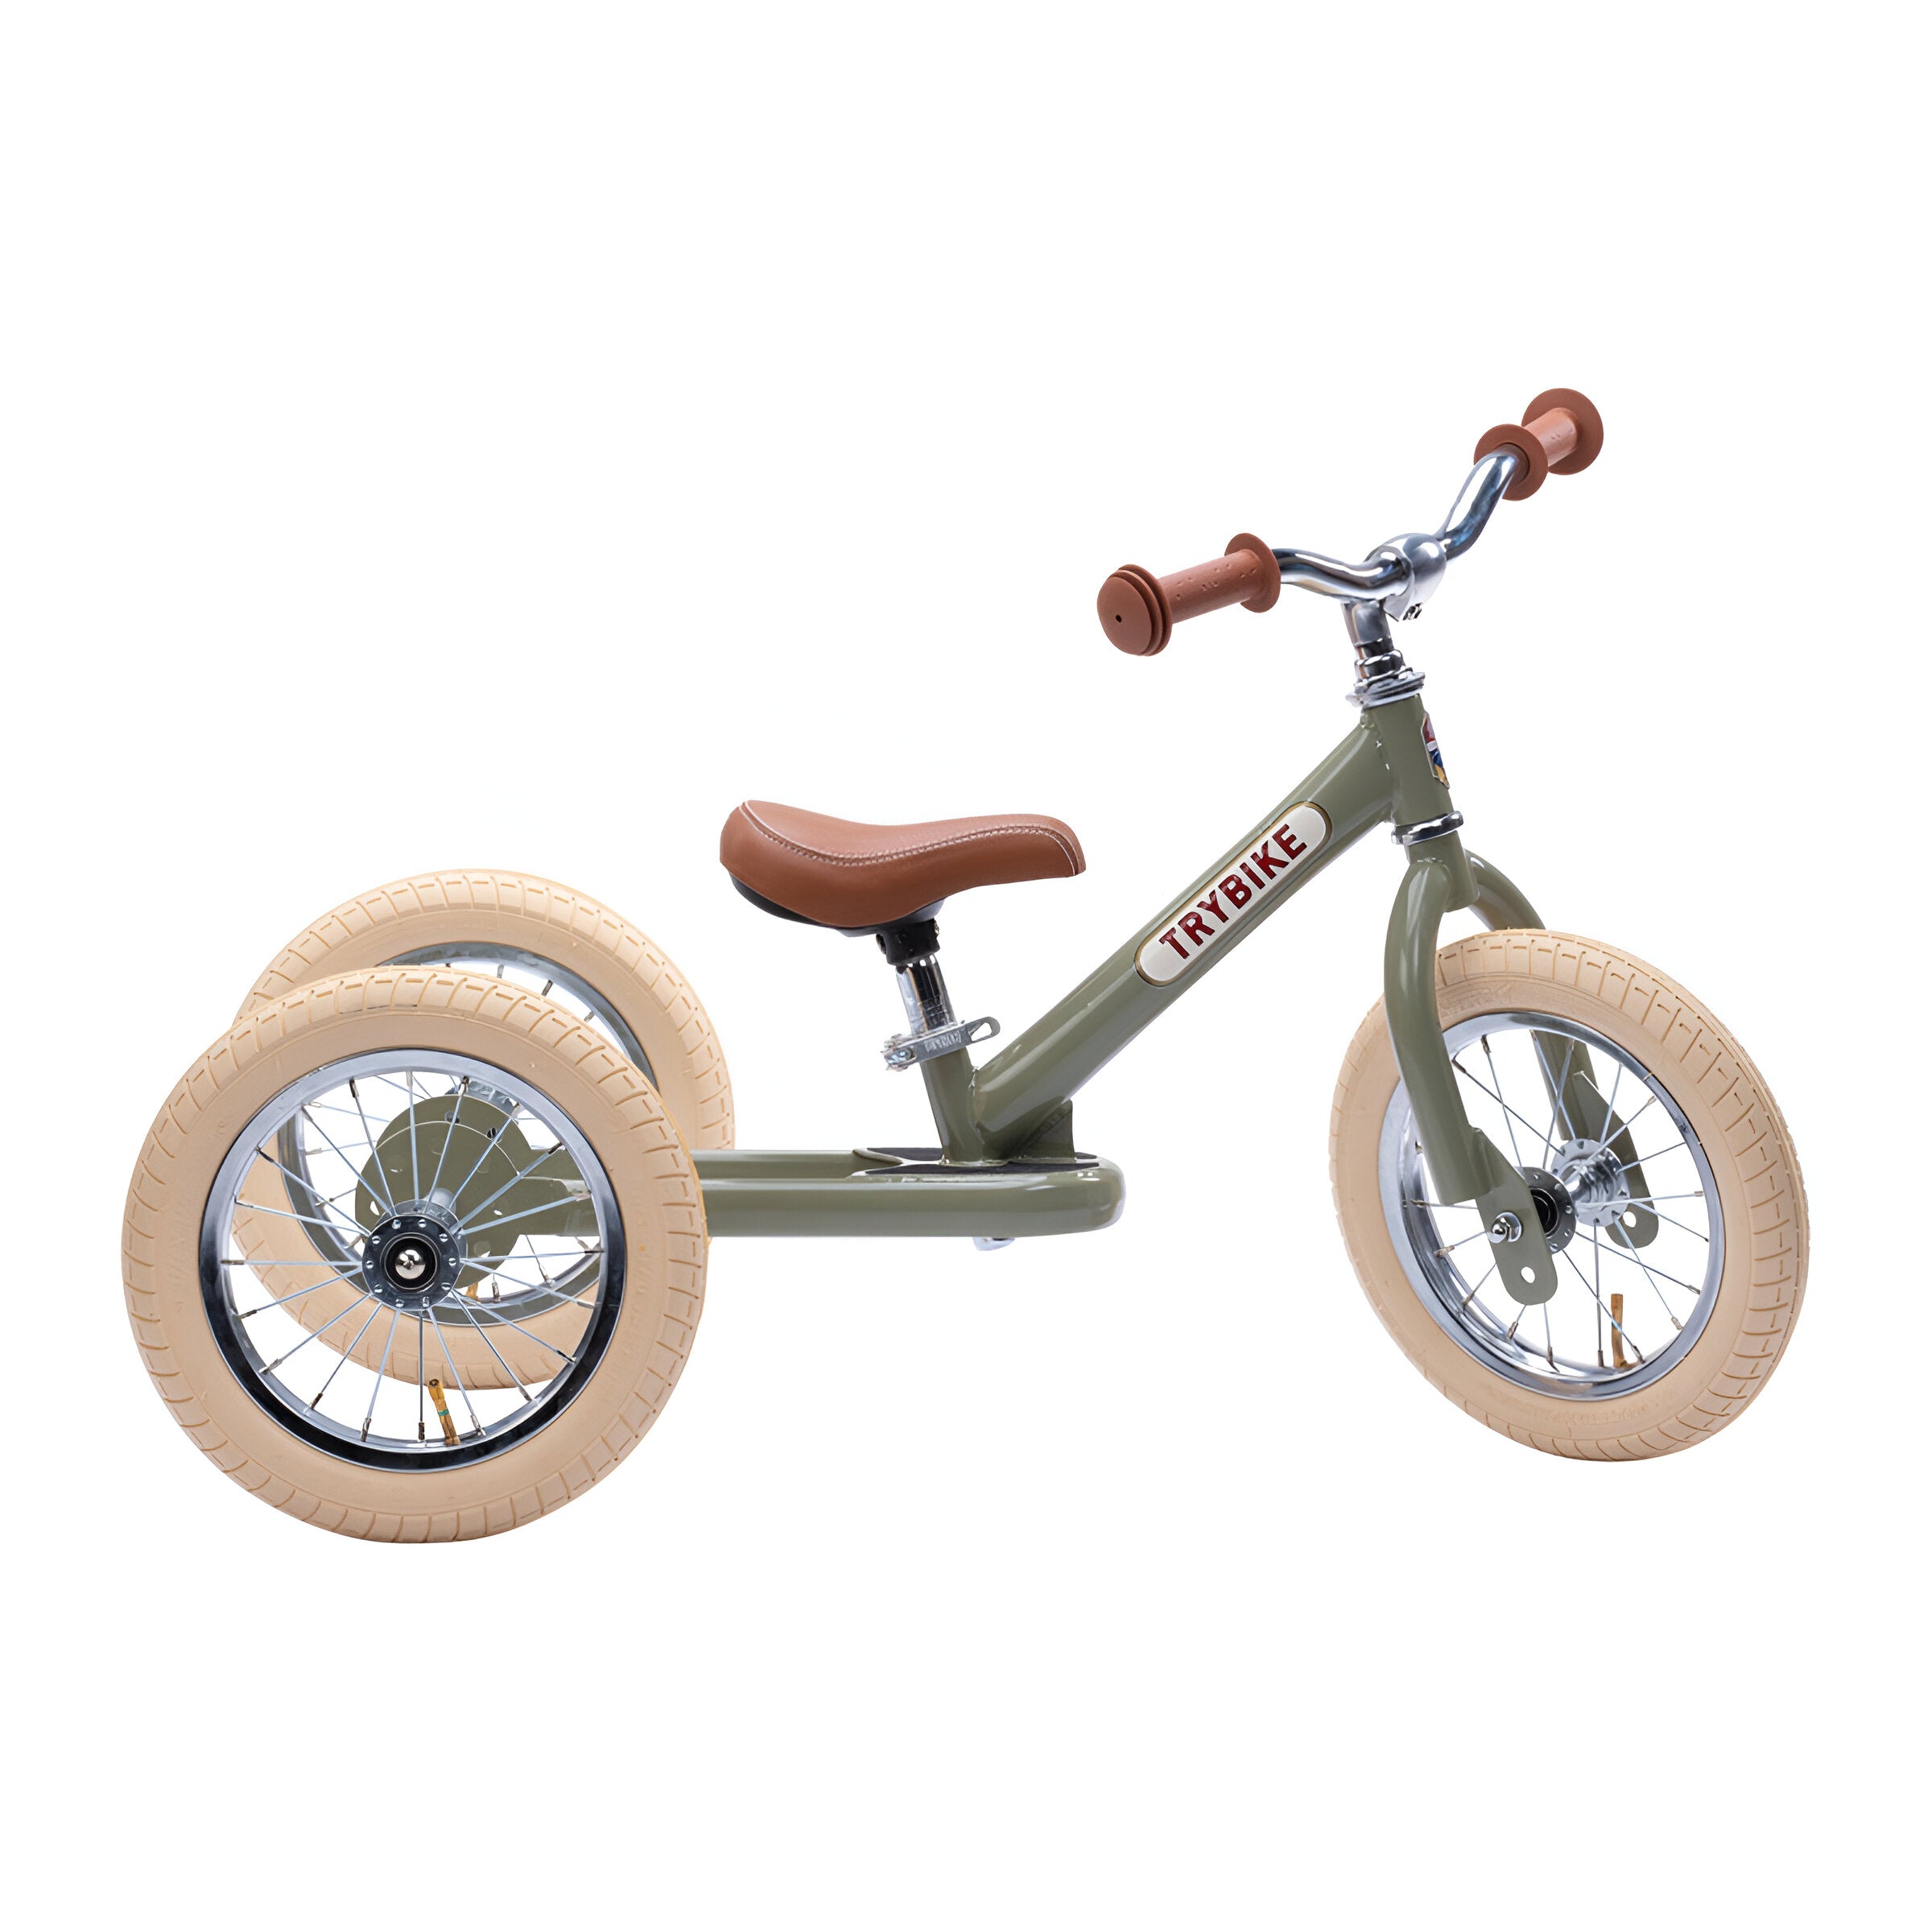 Trybike Vintage Green in tricycle mode for stability and support